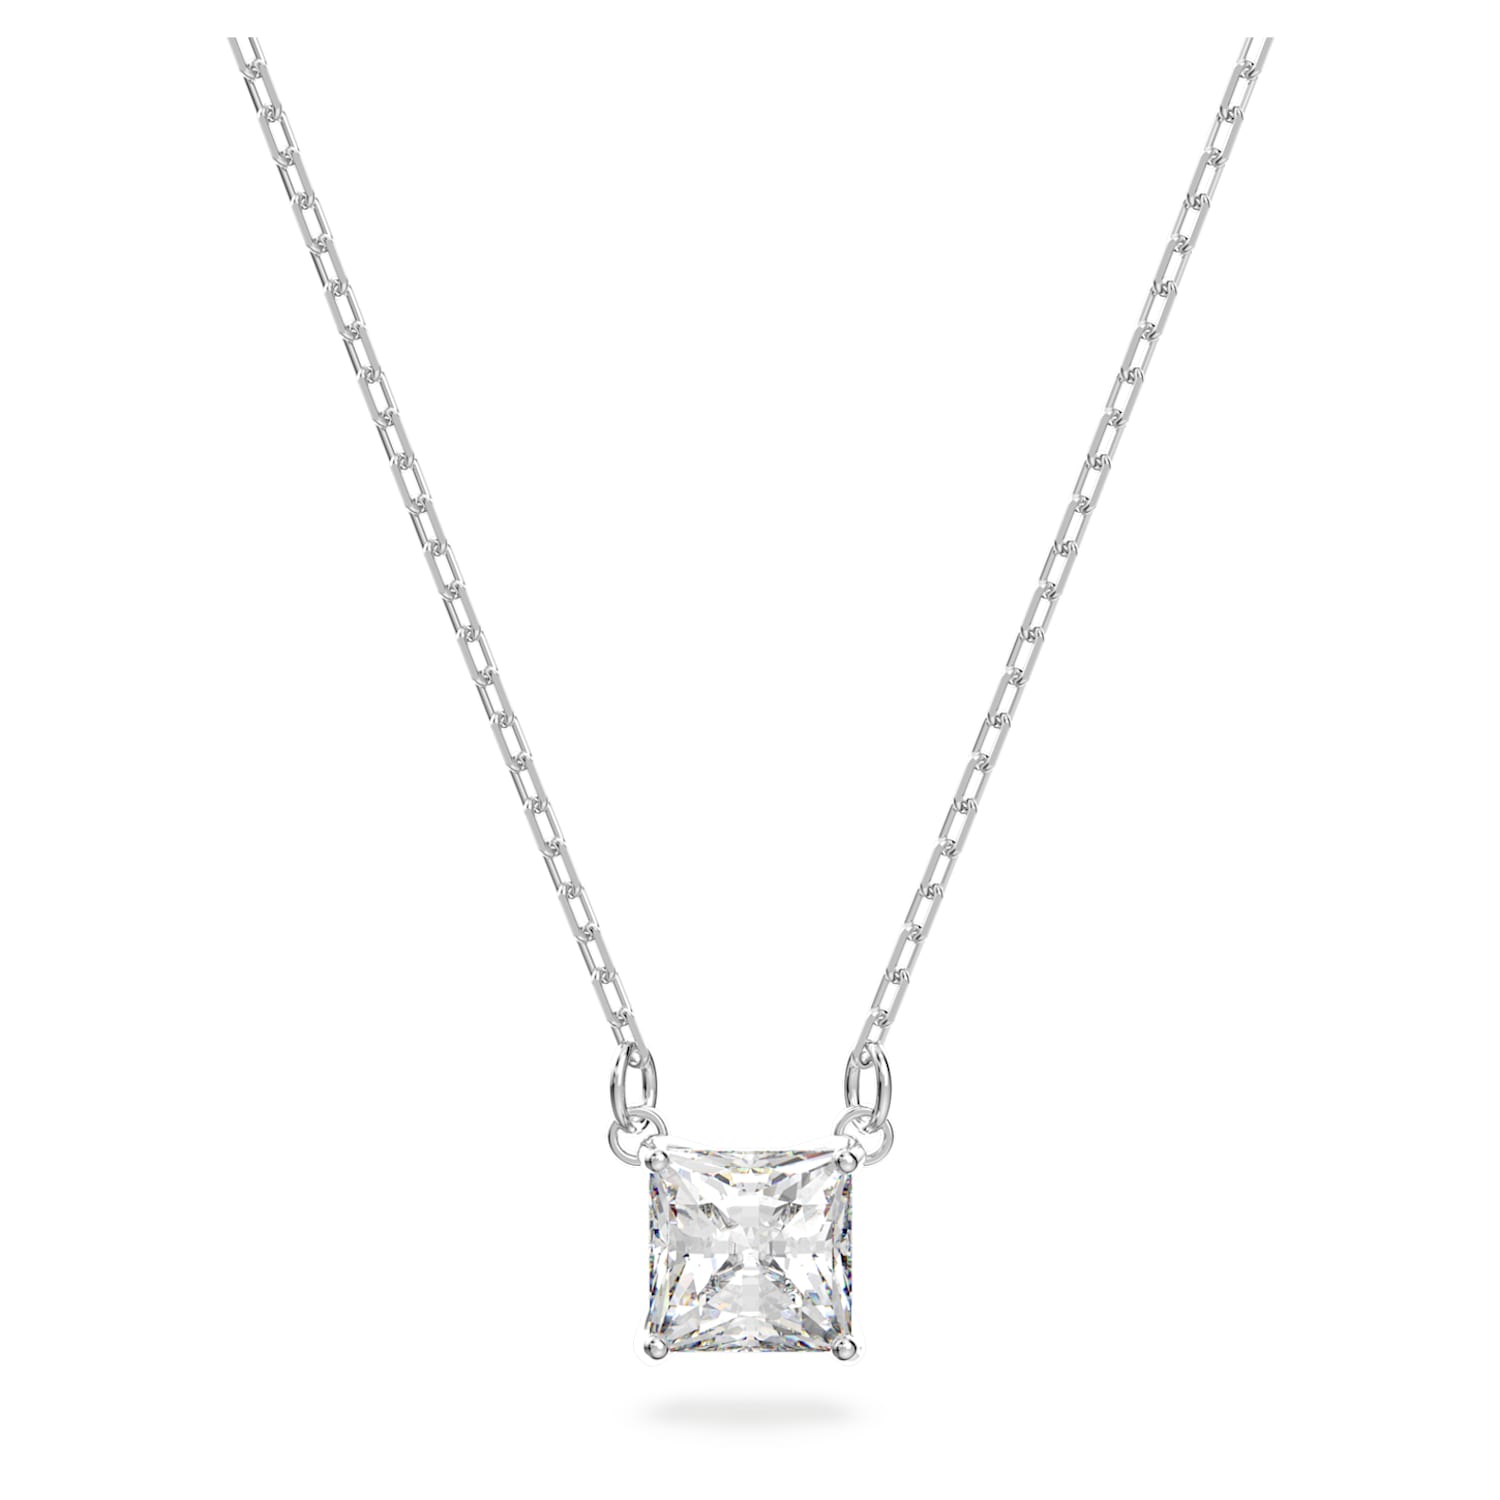 Attract necklace, Square cut, White, Rhodium plated